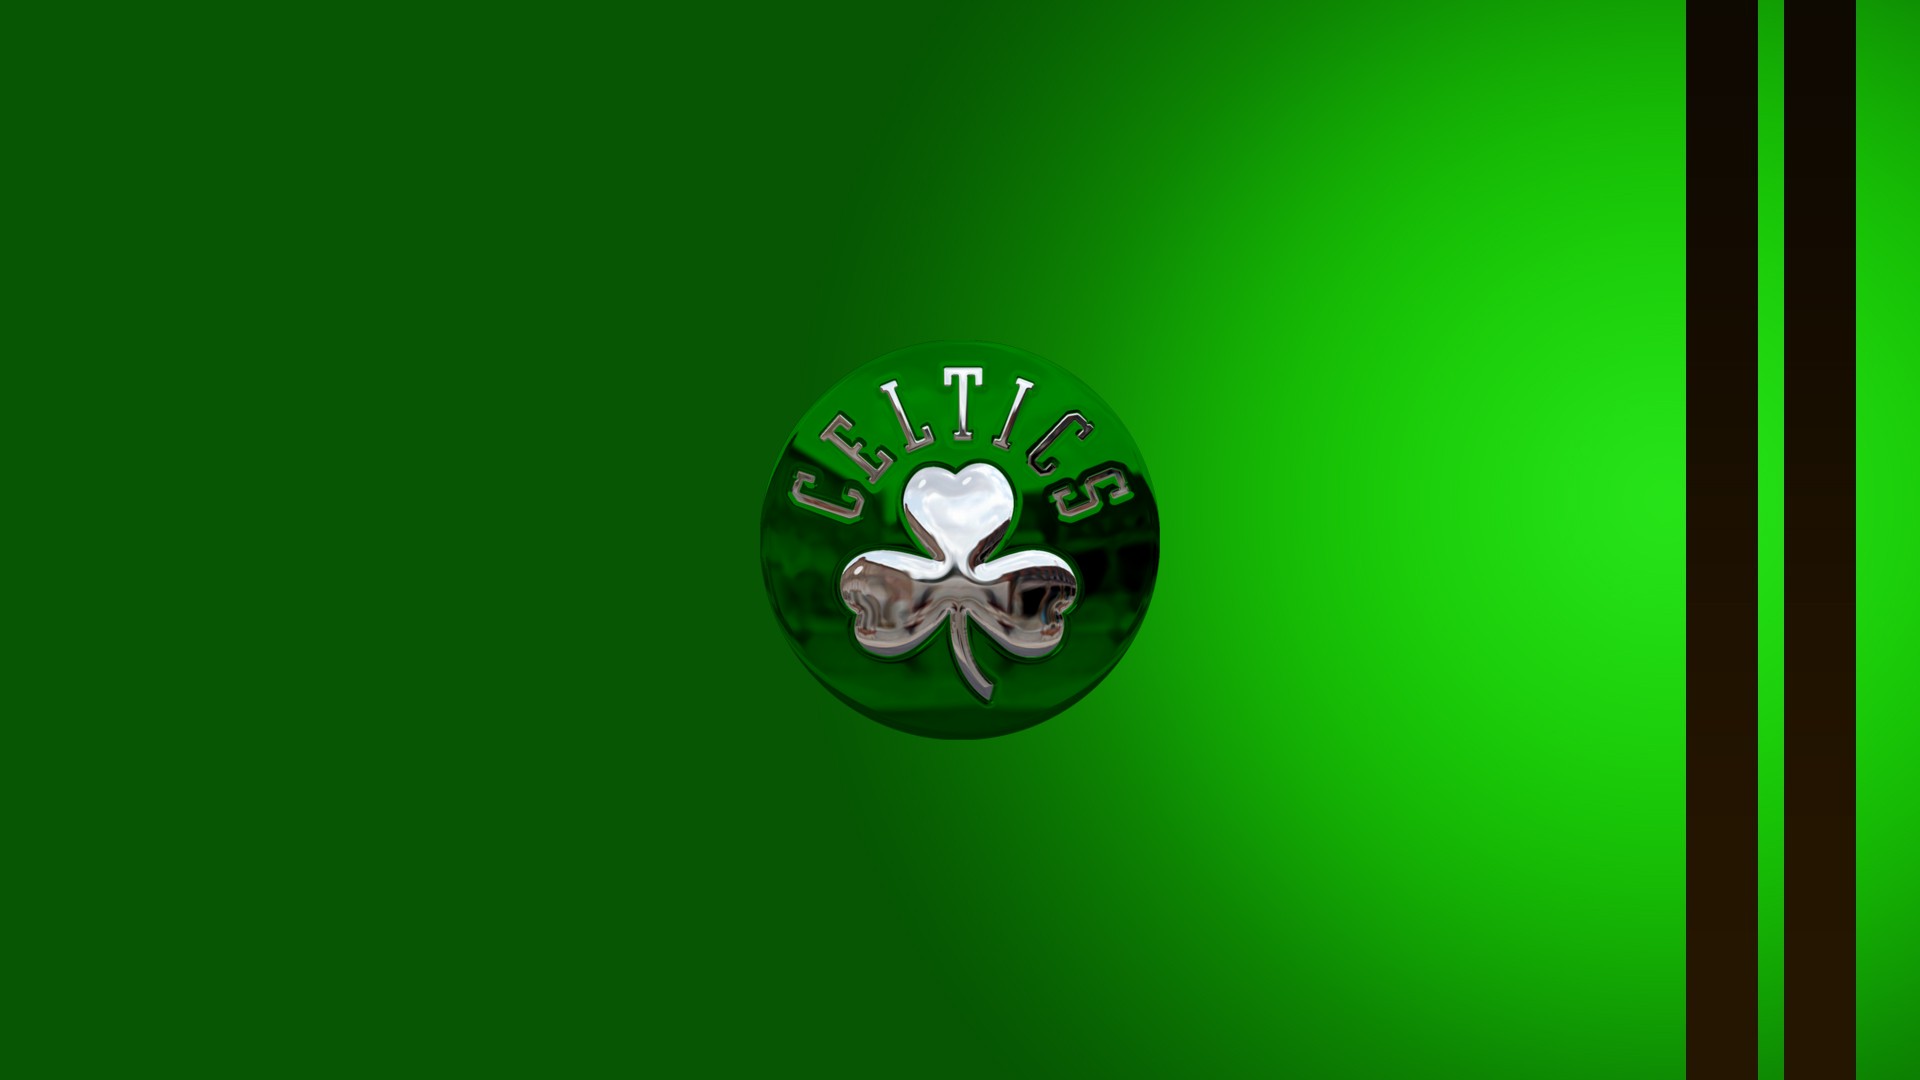 Boston Celtics Desktop Wallpapers with image dimensions 1920x1080 pixel. You can make this wallpaper for your Desktop Computer Backgrounds, Windows or Mac Screensavers, iPhone Lock screen, Tablet or Android and another Mobile Phone device